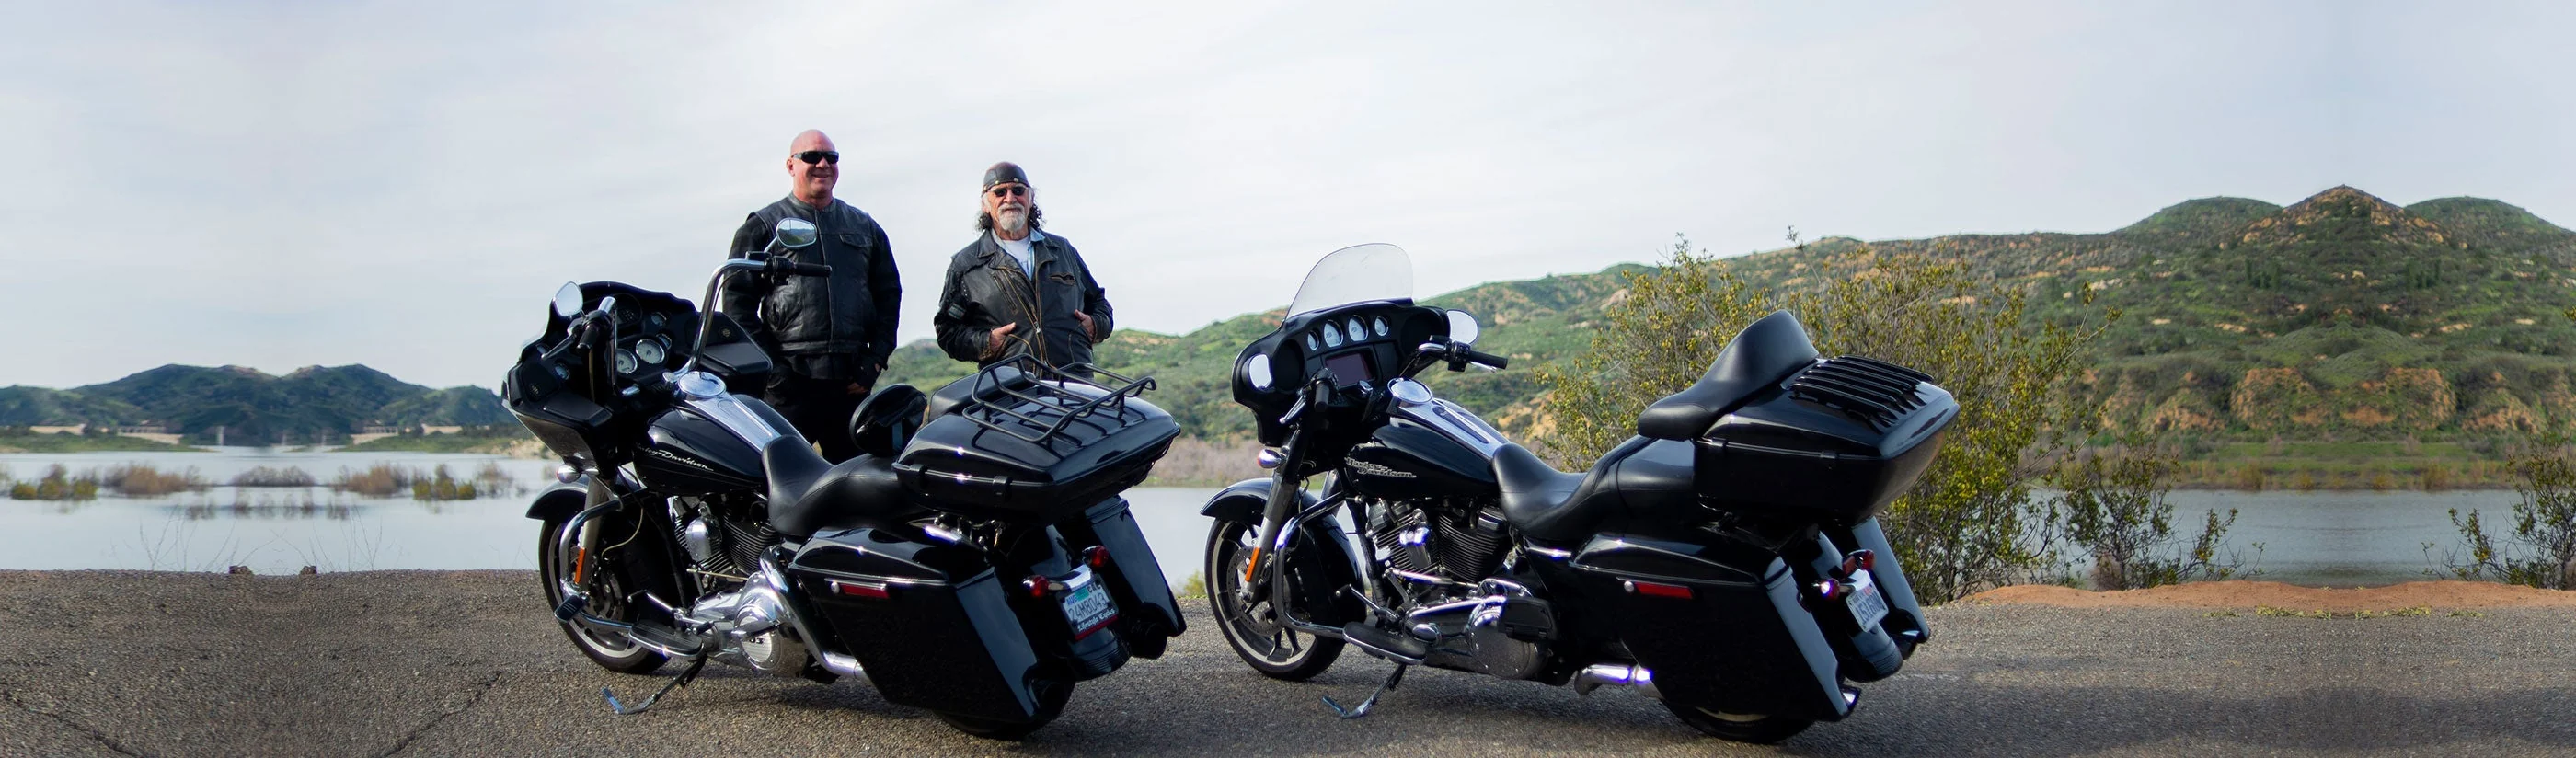 Luggage Trunks for Victory Motorcycles